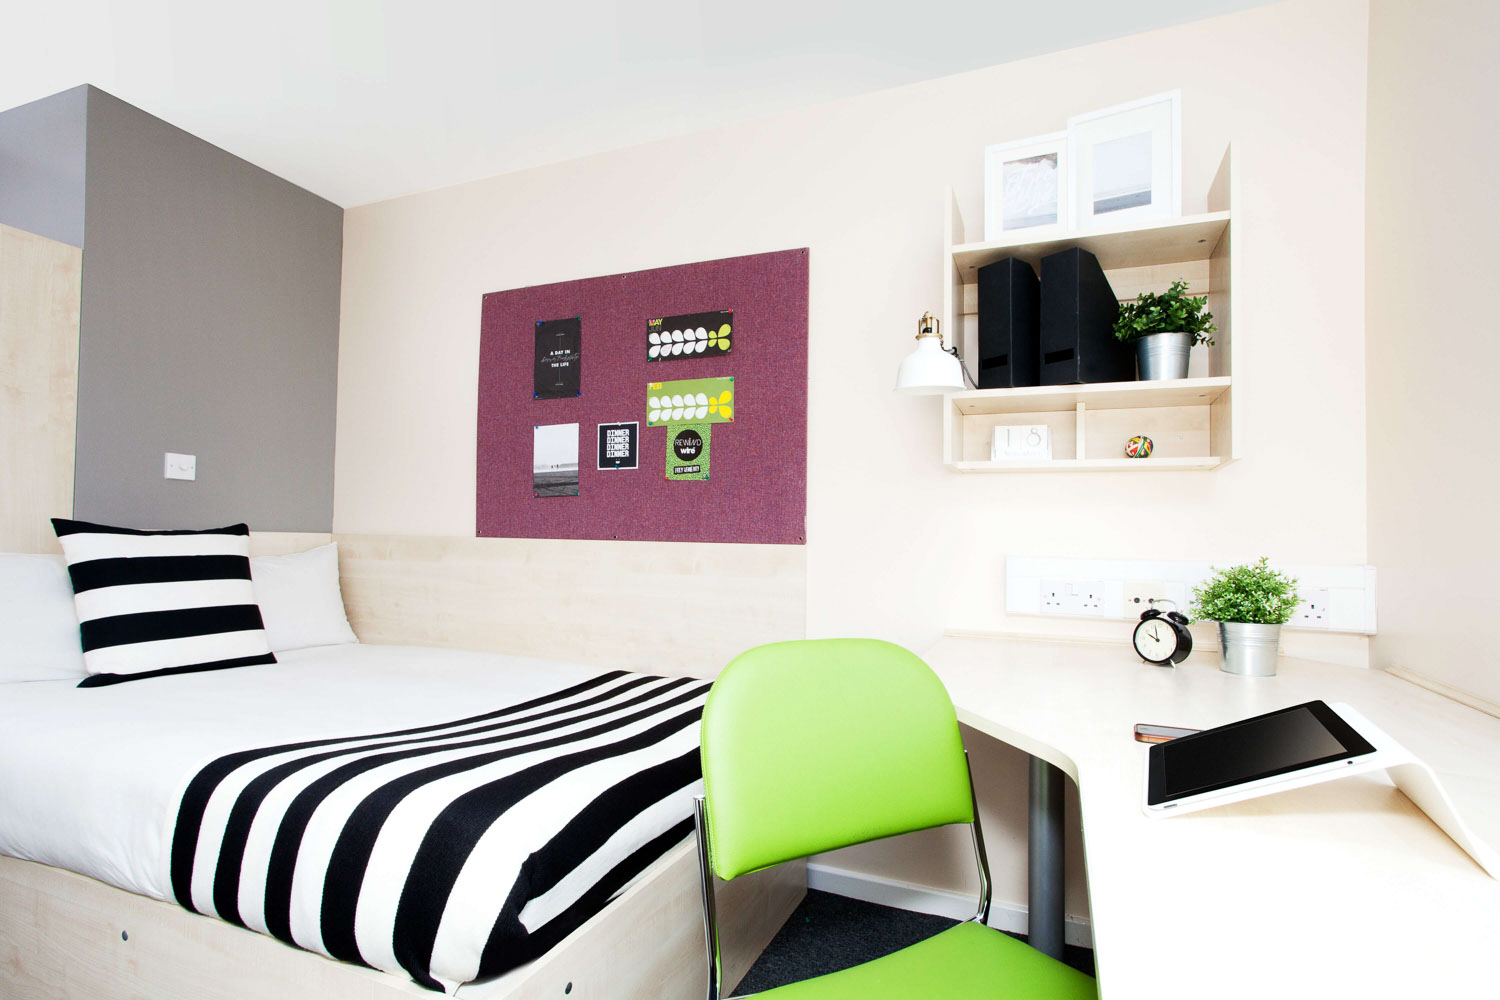 Bedroom with black and white striped bedding a green desk chair and stationery on shelves